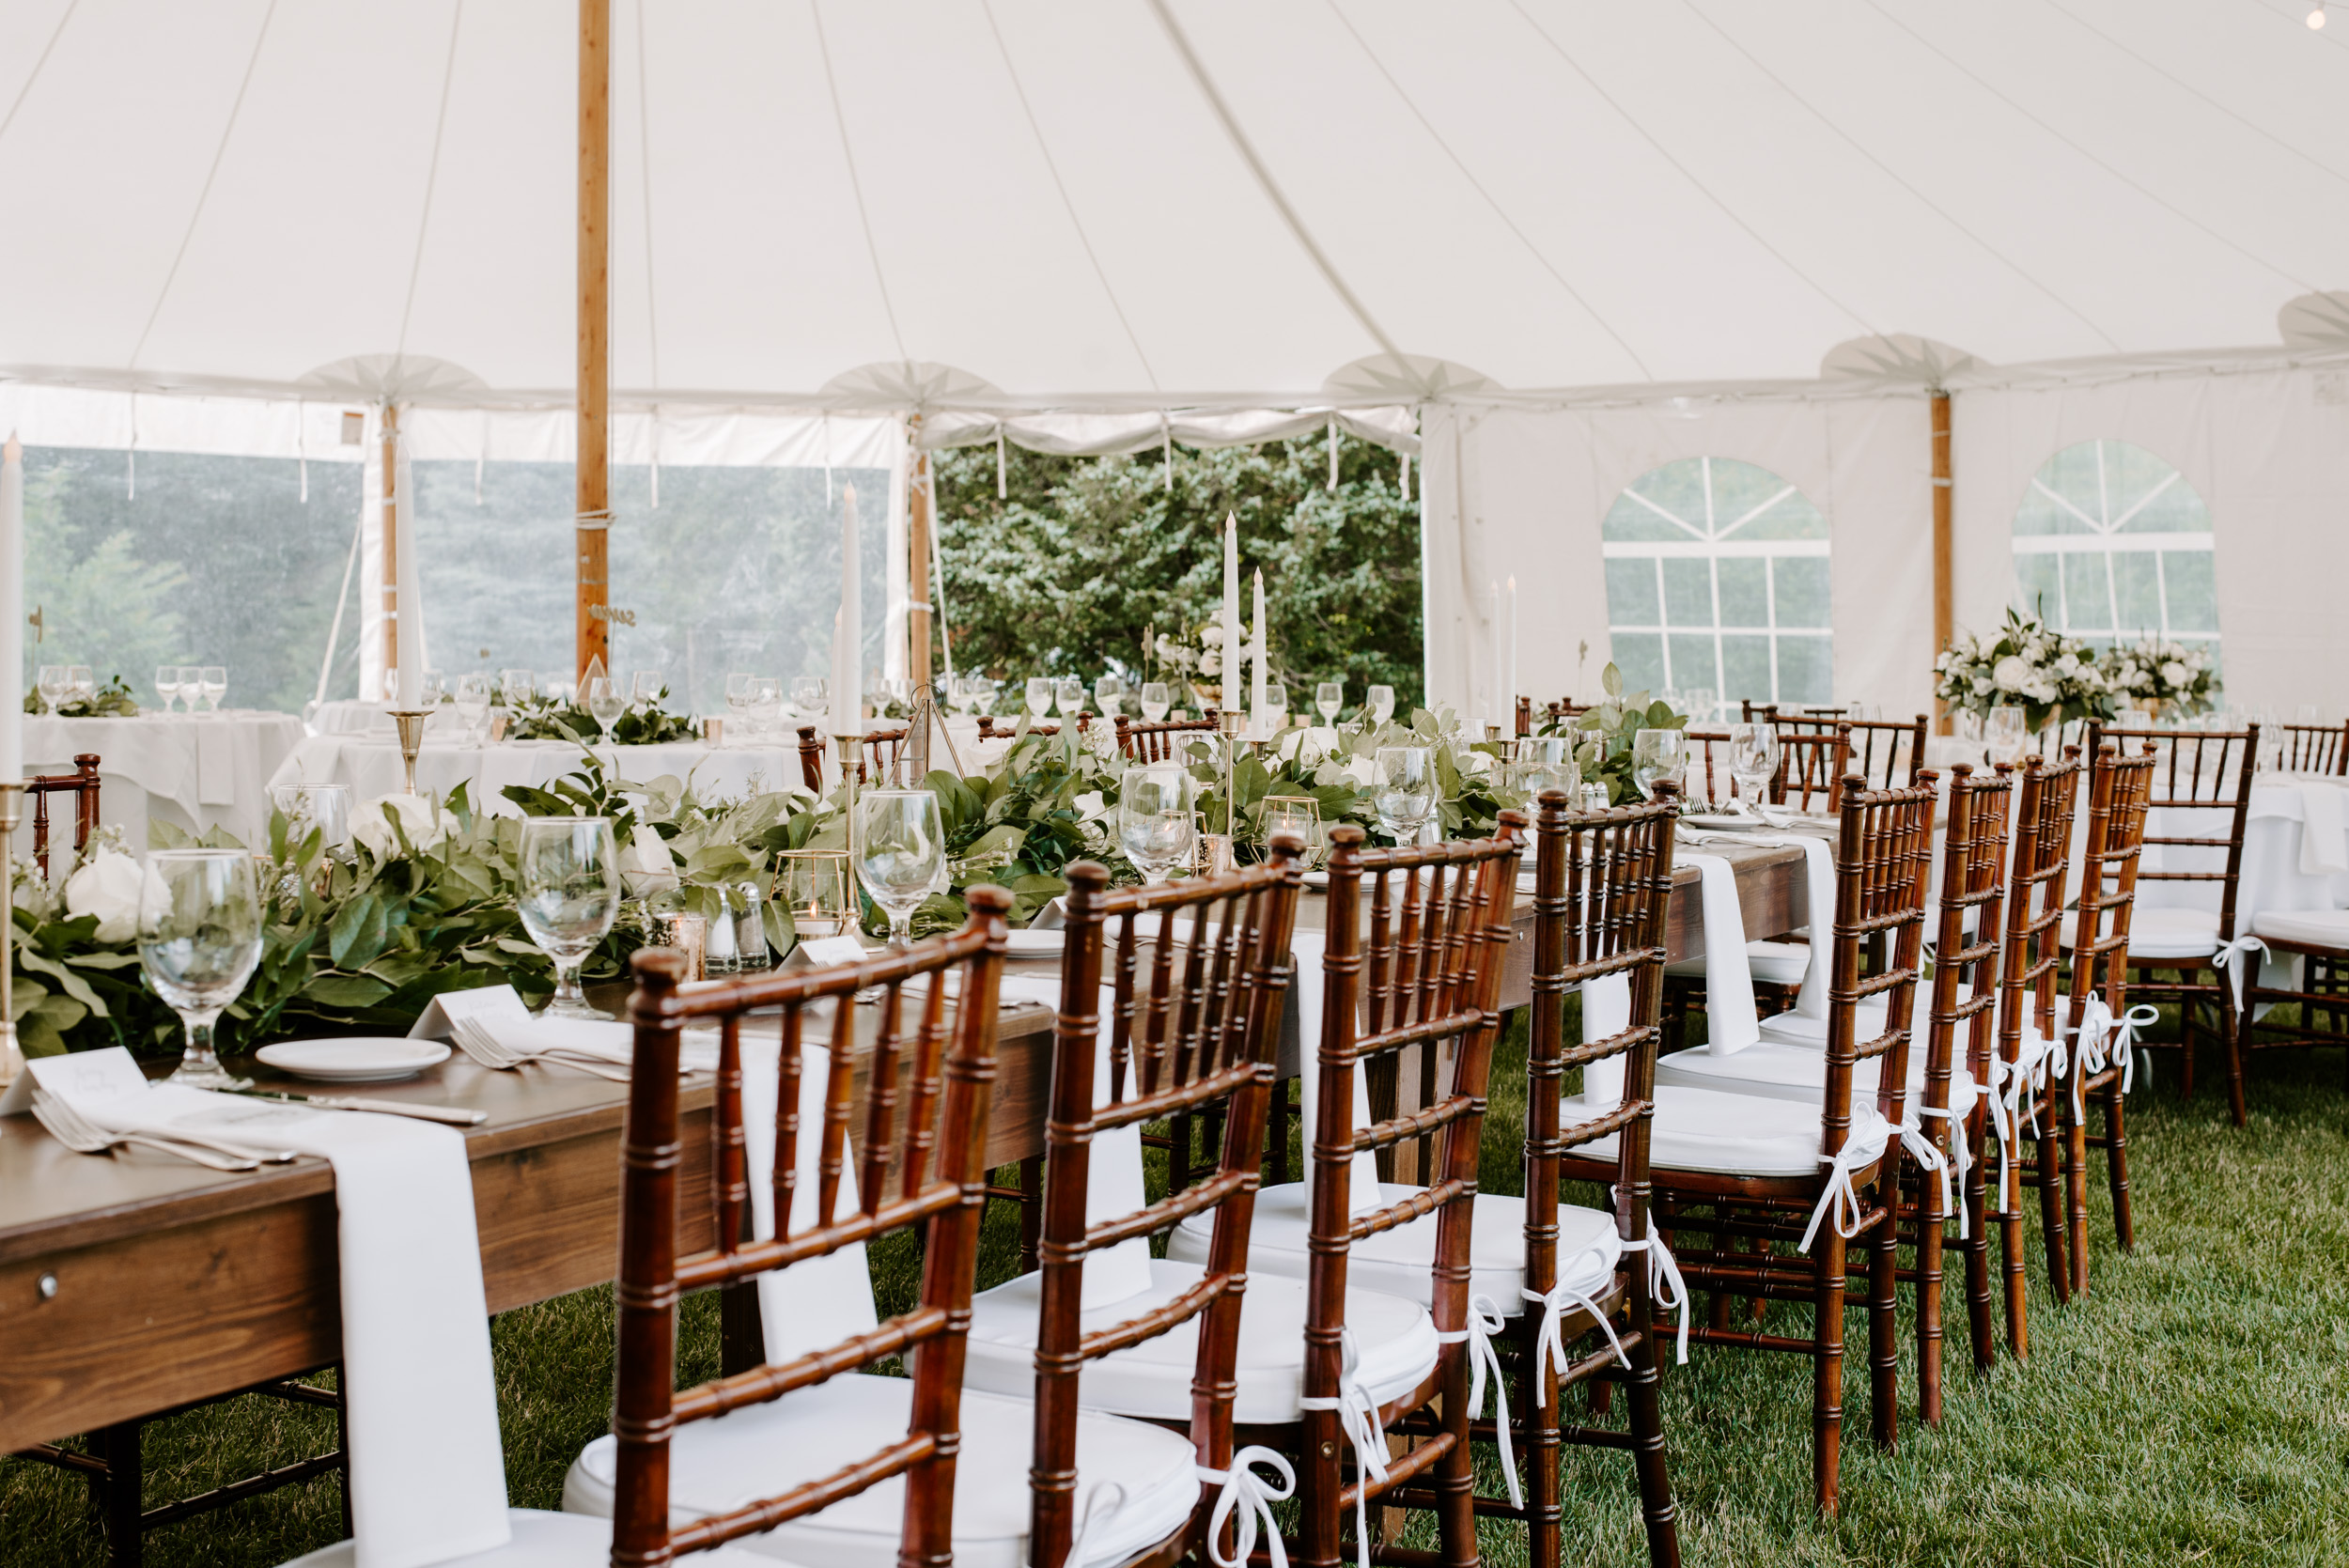 Top 10 Small Wedding Venues in New England and New York for Intimate